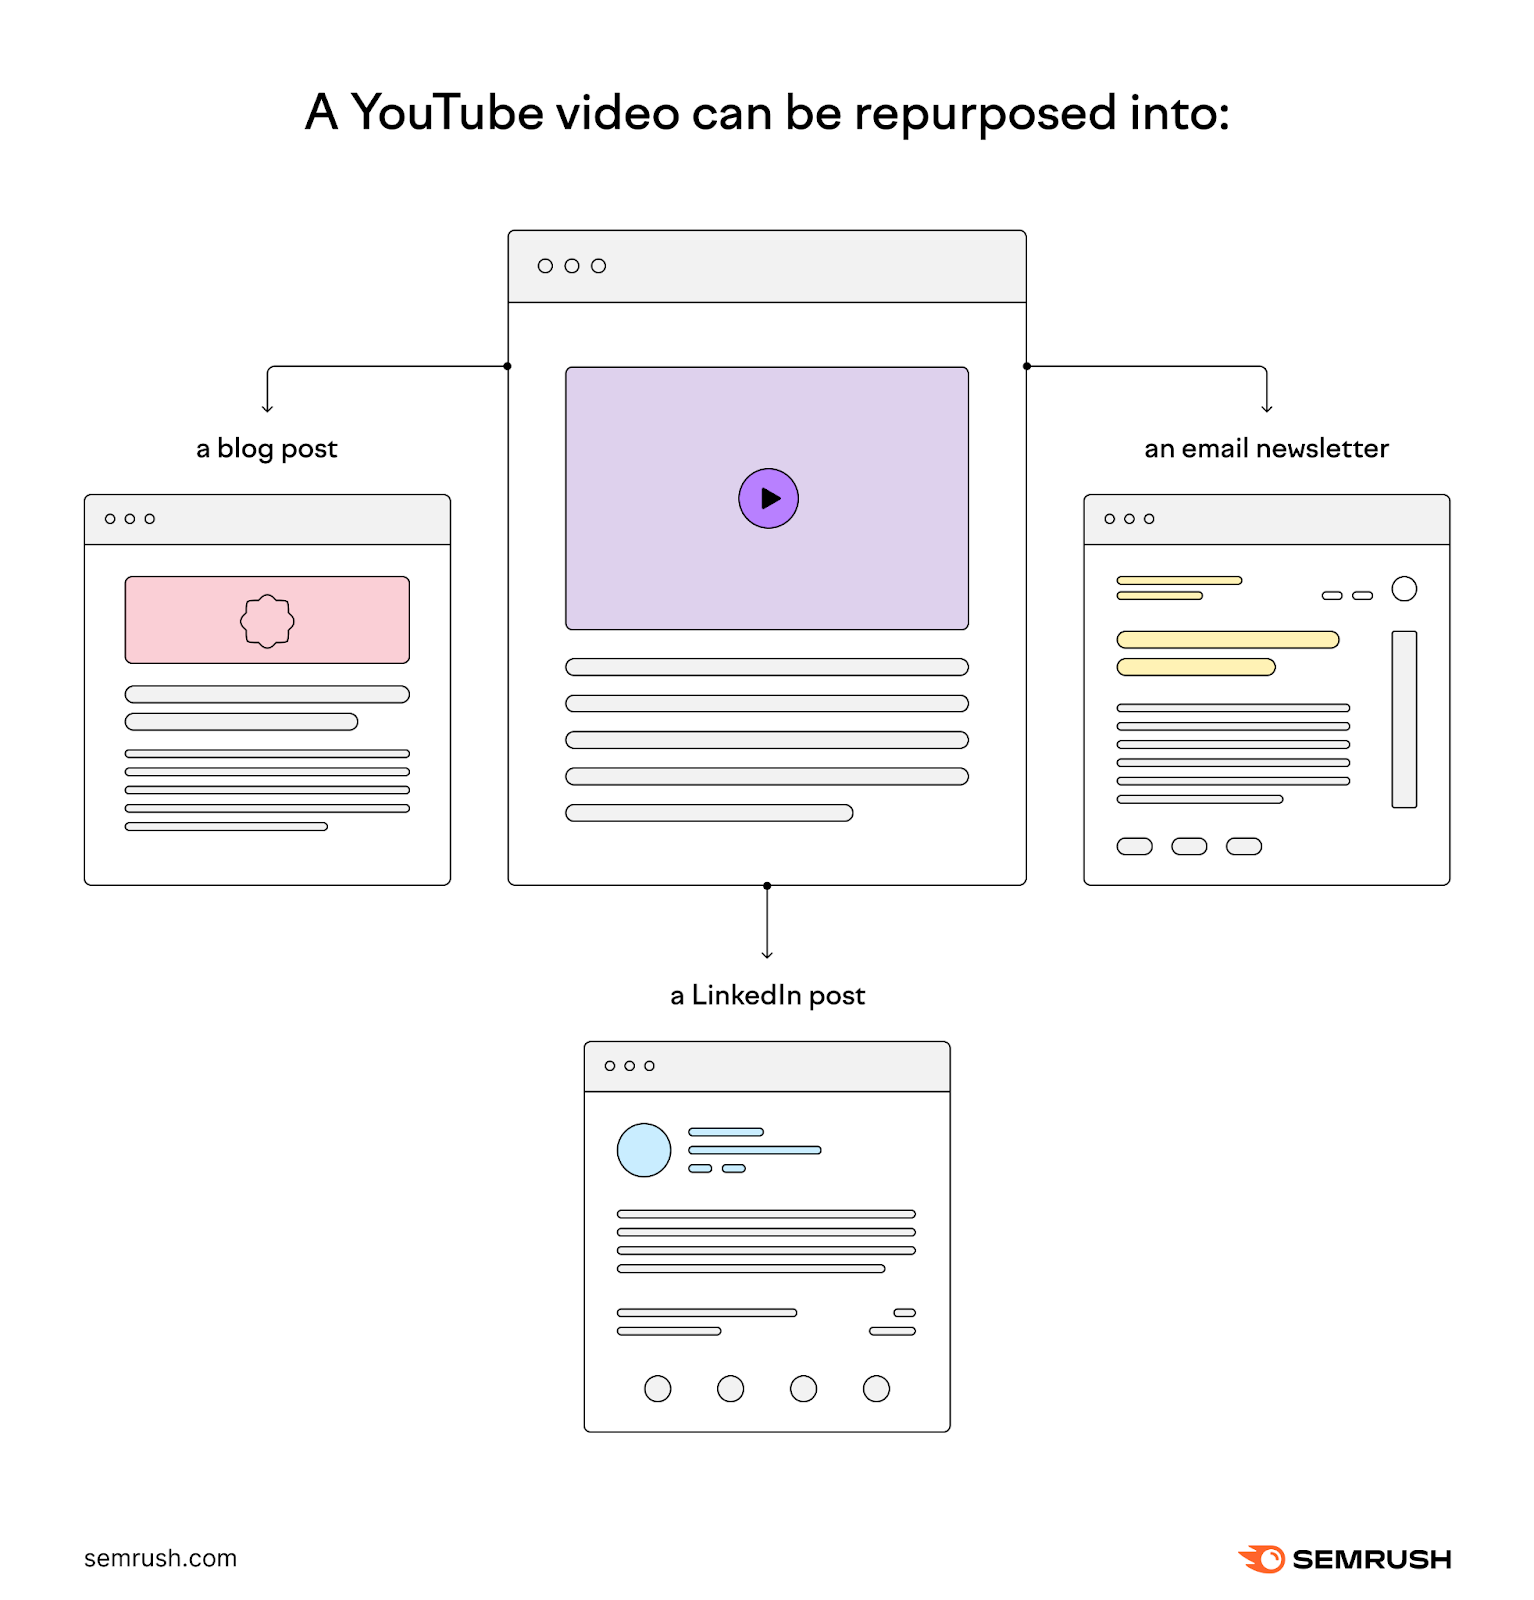 A visual showing repurposing of a YouTube video into a blog post, a LinkedIn post and an email newsletter